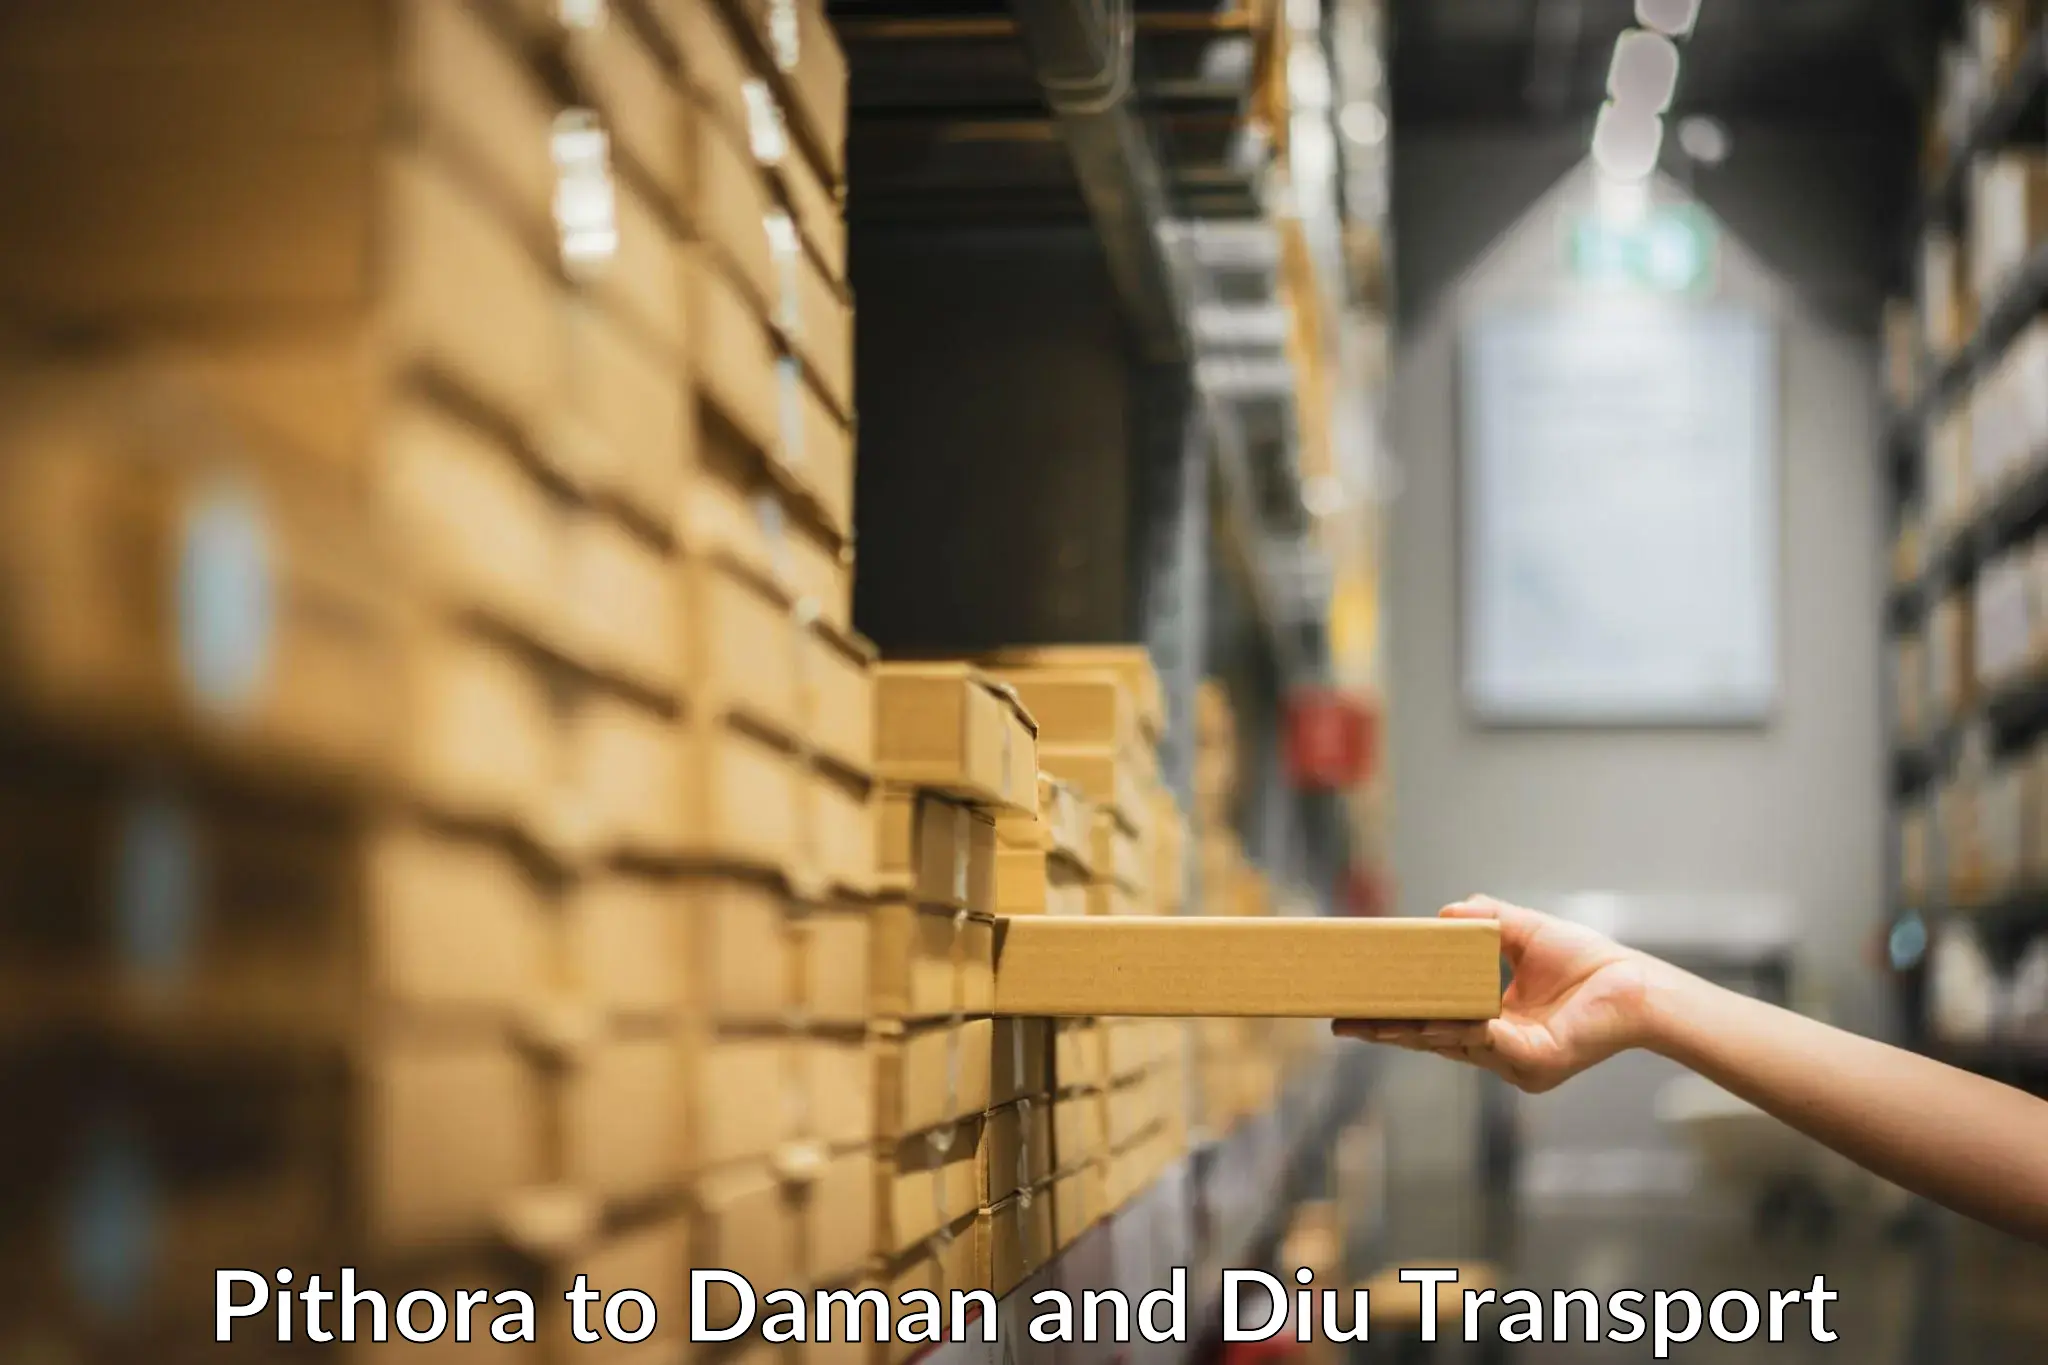 Delivery service Pithora to Daman and Diu